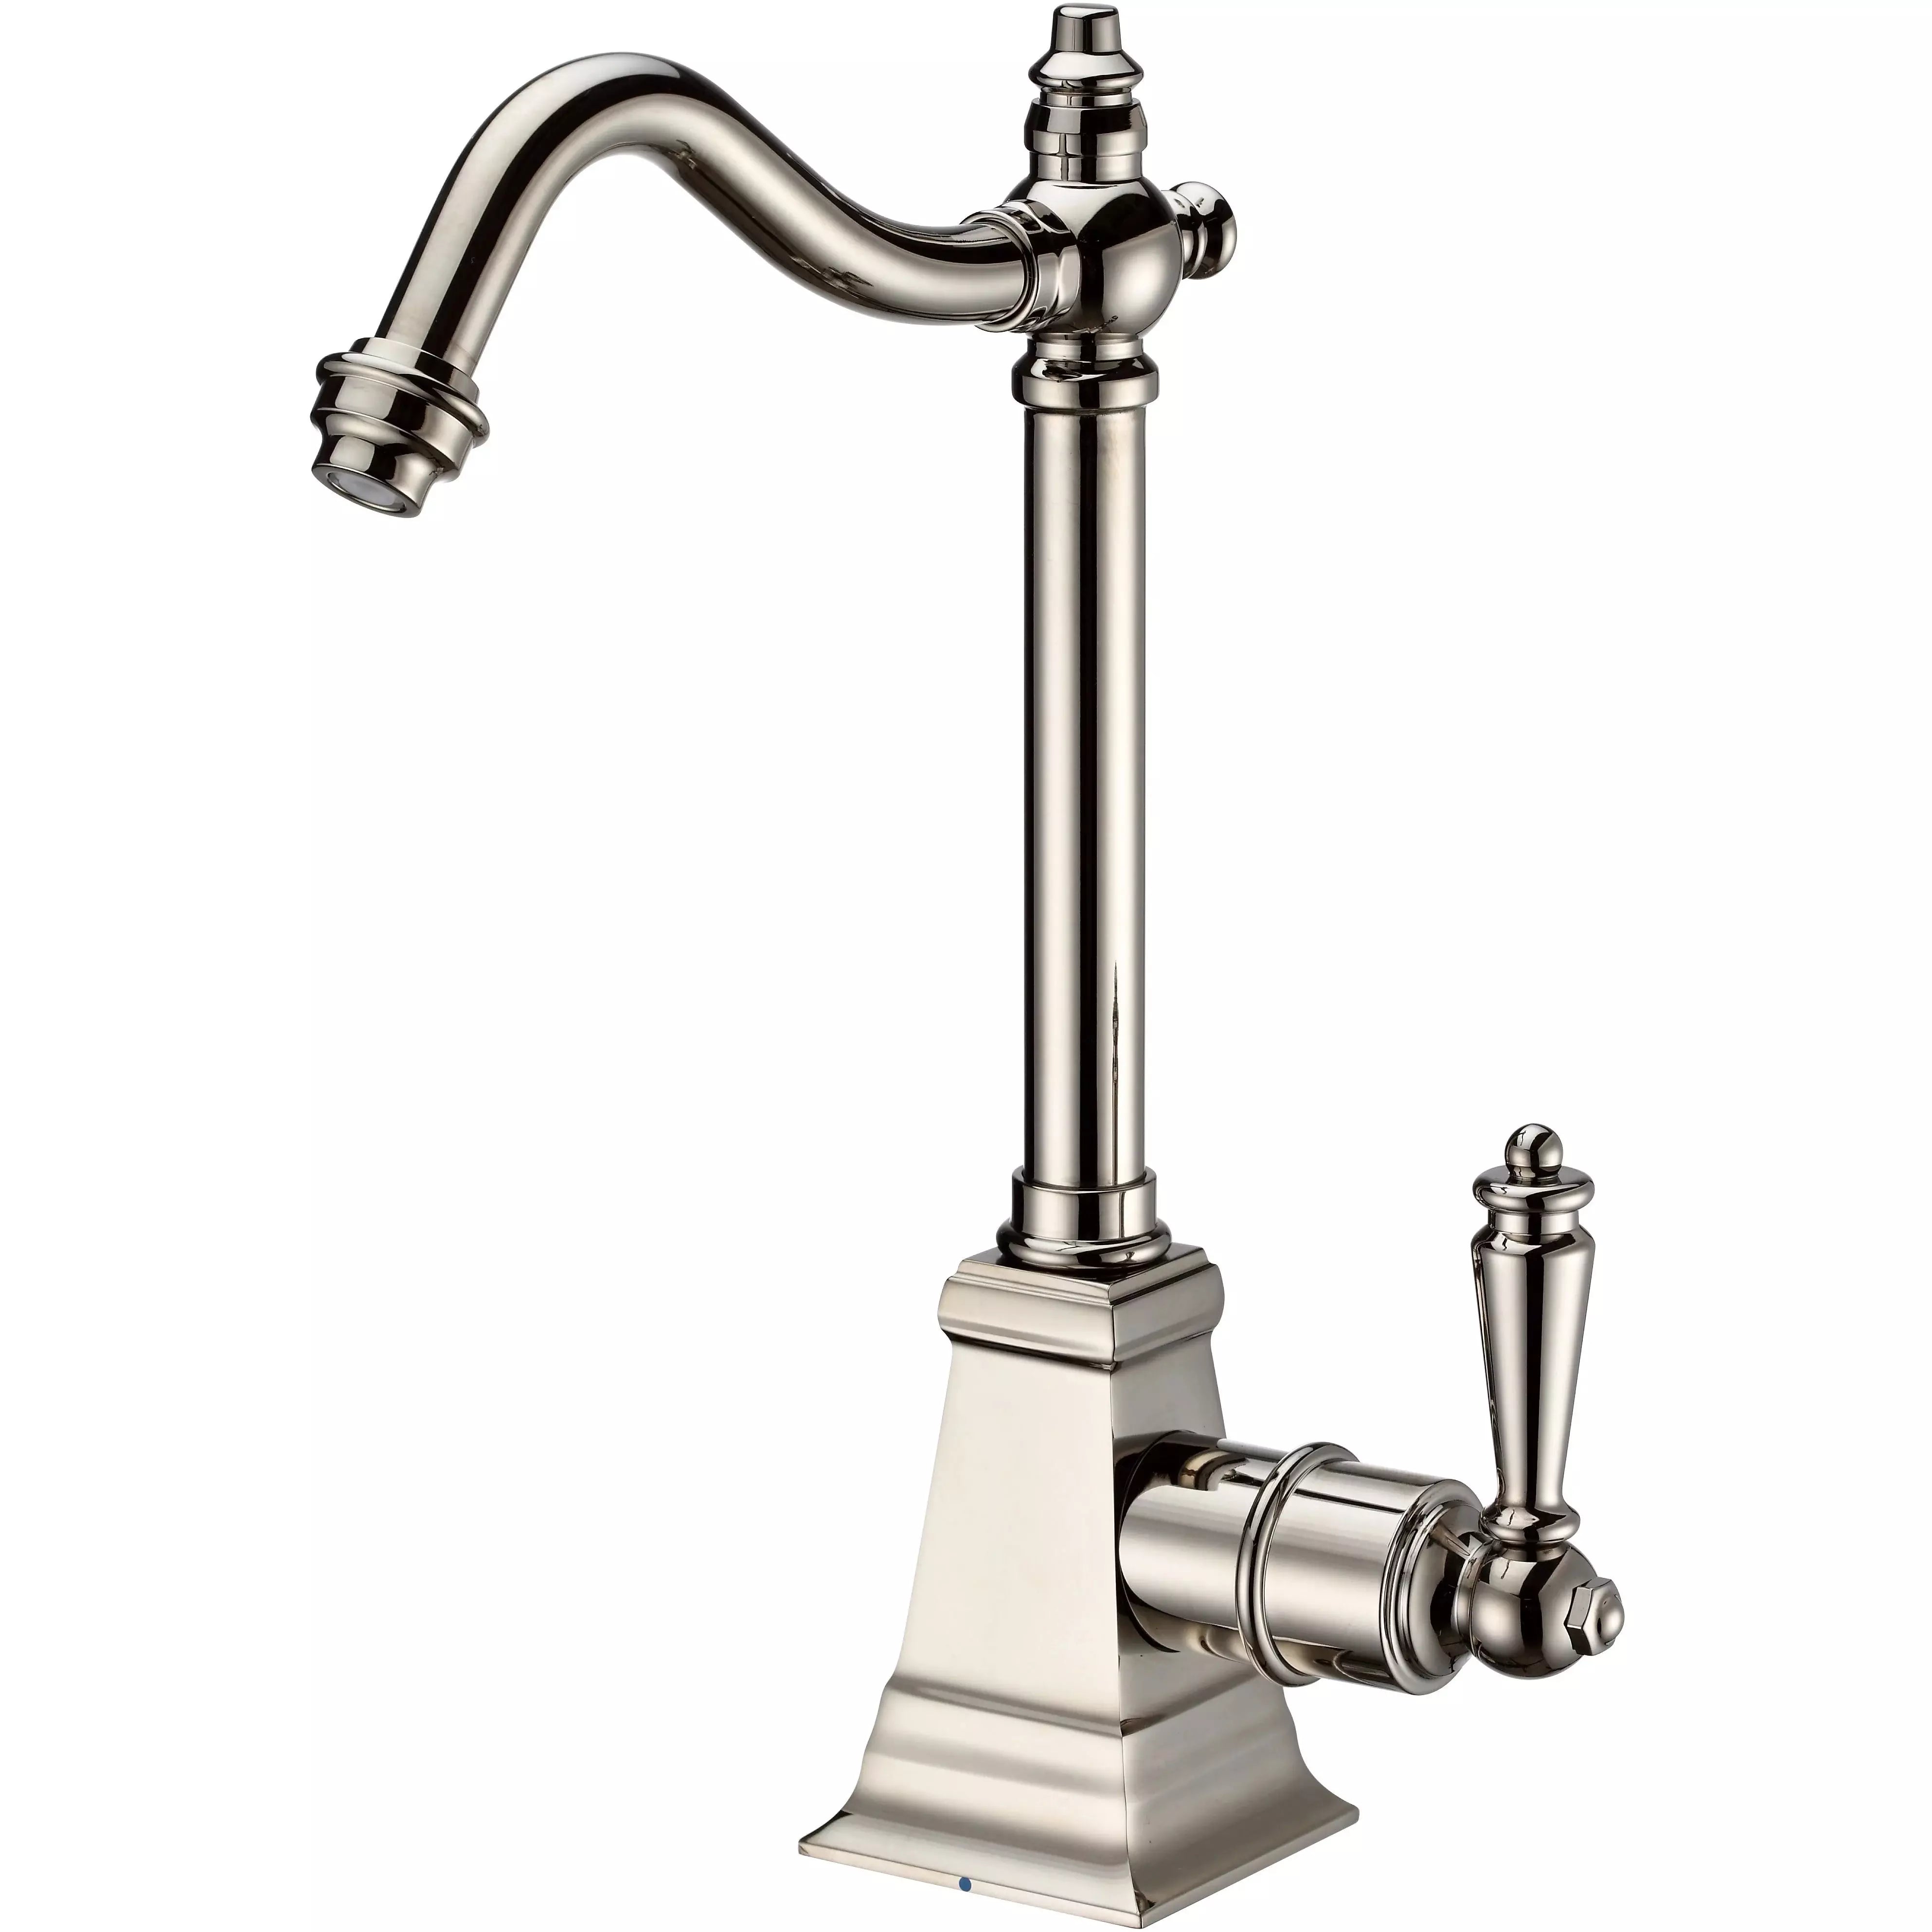 WHITEHAUS Point of Use Cold Water Drinking Faucet with Traditional Swivel Spout - WHFH-C2011